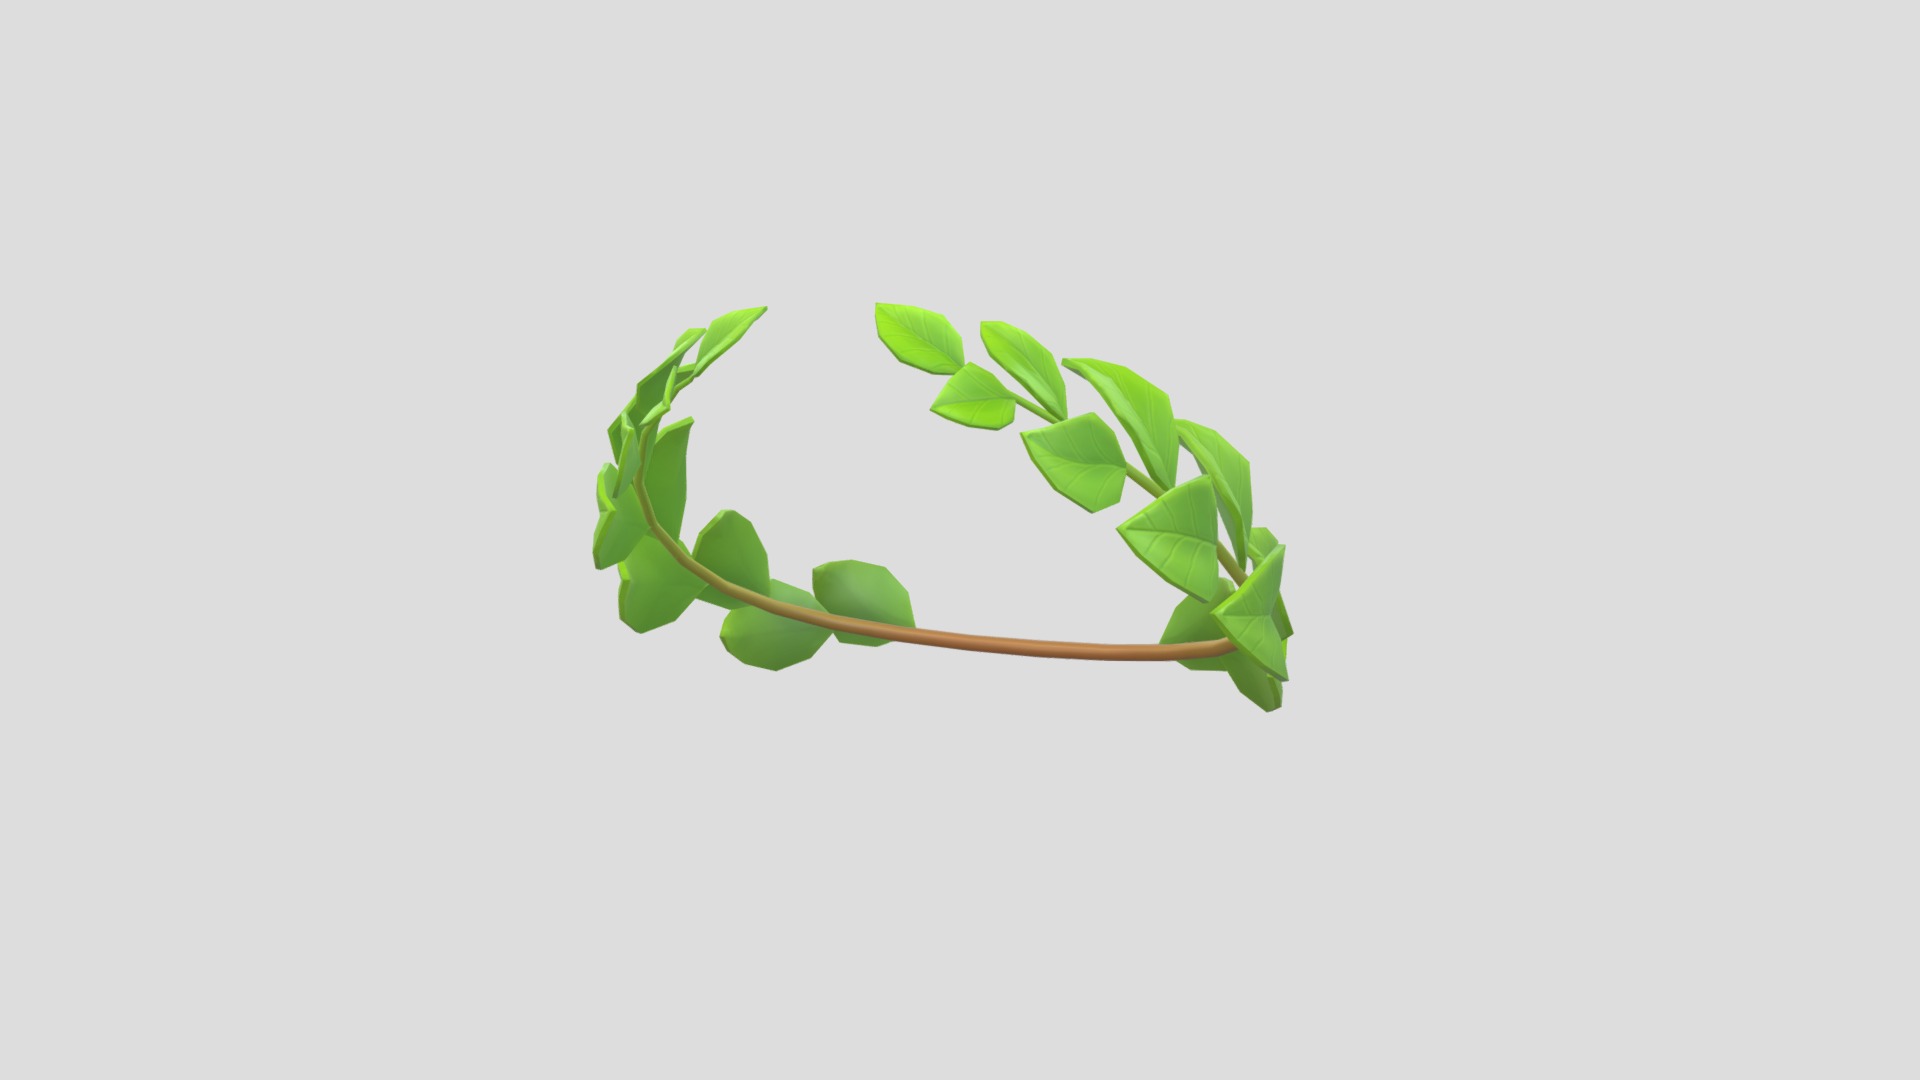 3D model Laurel Crown - This is a 3D model of the Laurel Crown. The 3D model is about a green plant with leaves.